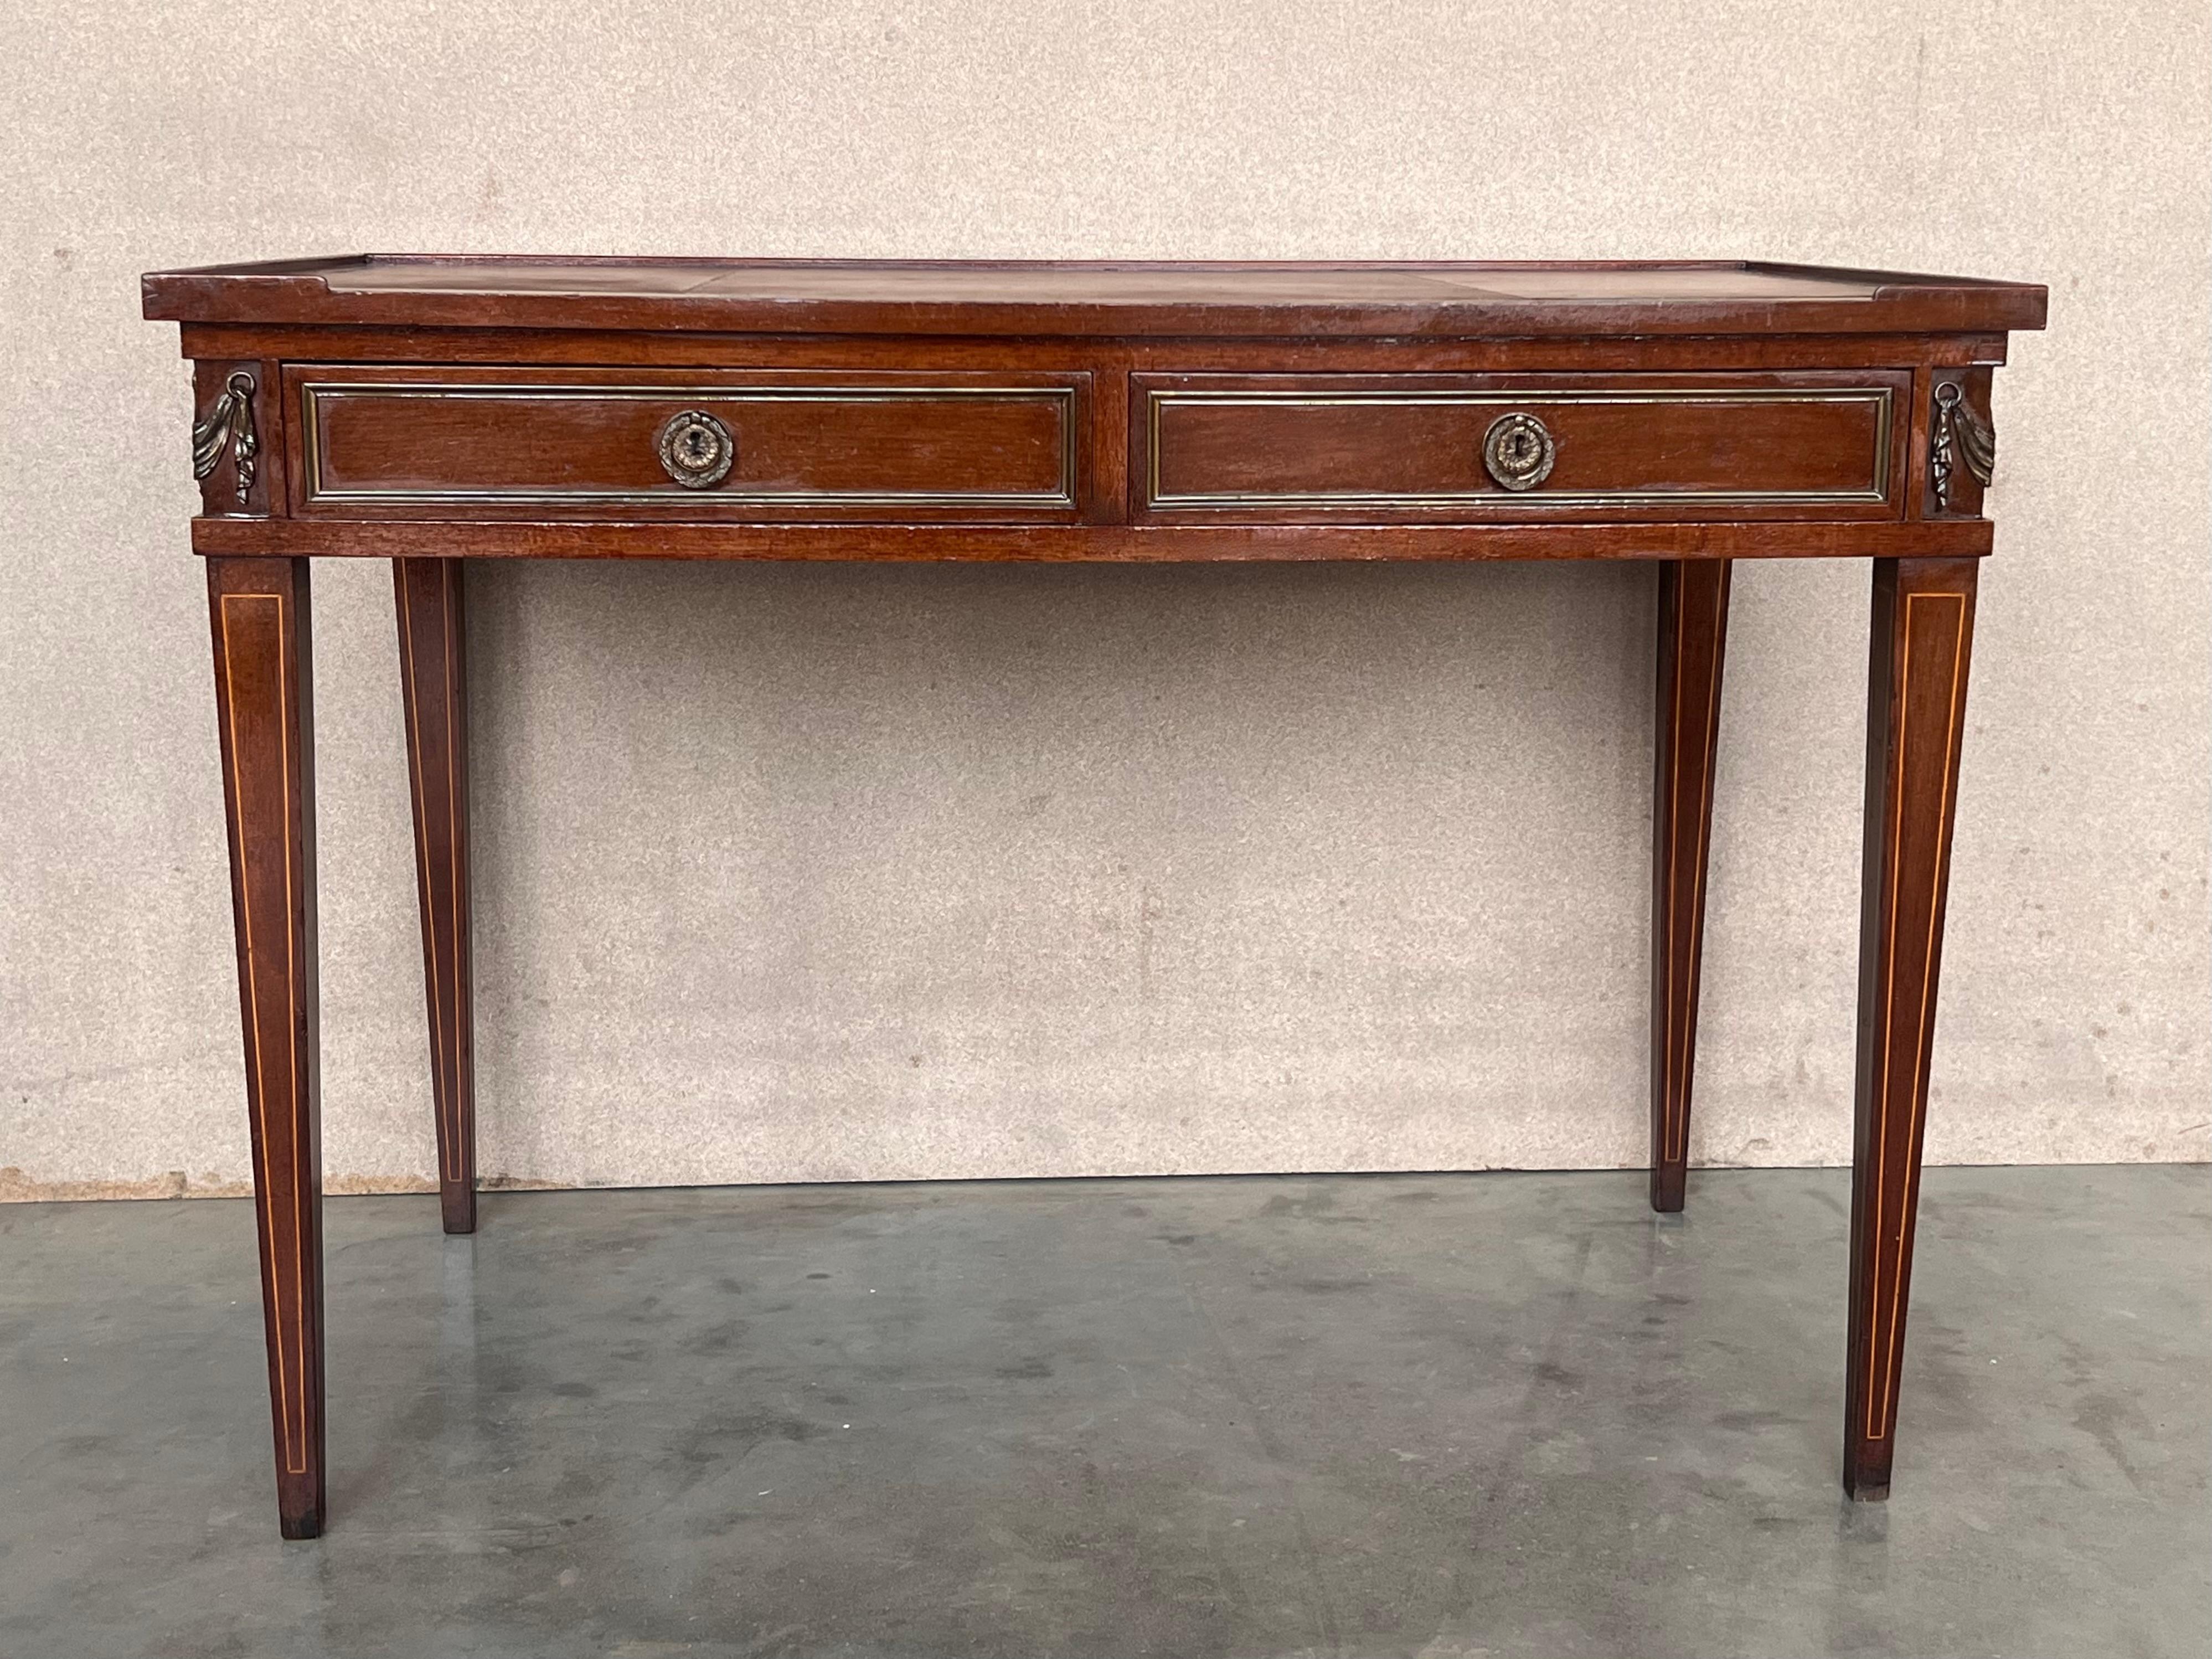 A French Empire style mahogany bronze mounted writing desk with leather top, circa 1940.